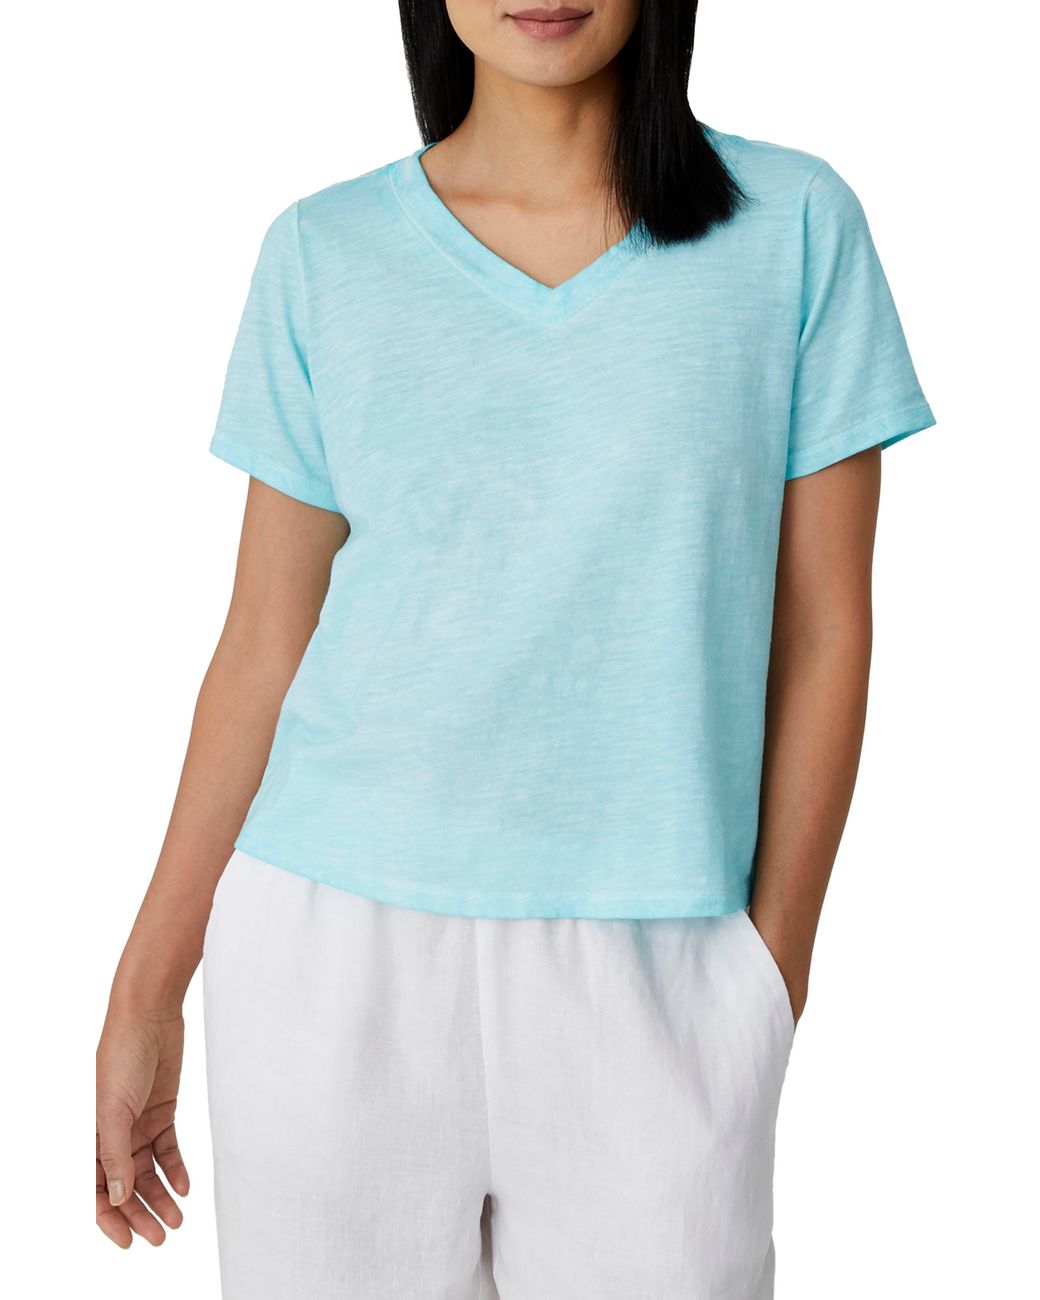 Eileen Fisher V-neck Organic Cotton T-shirt in Blue - Lyst